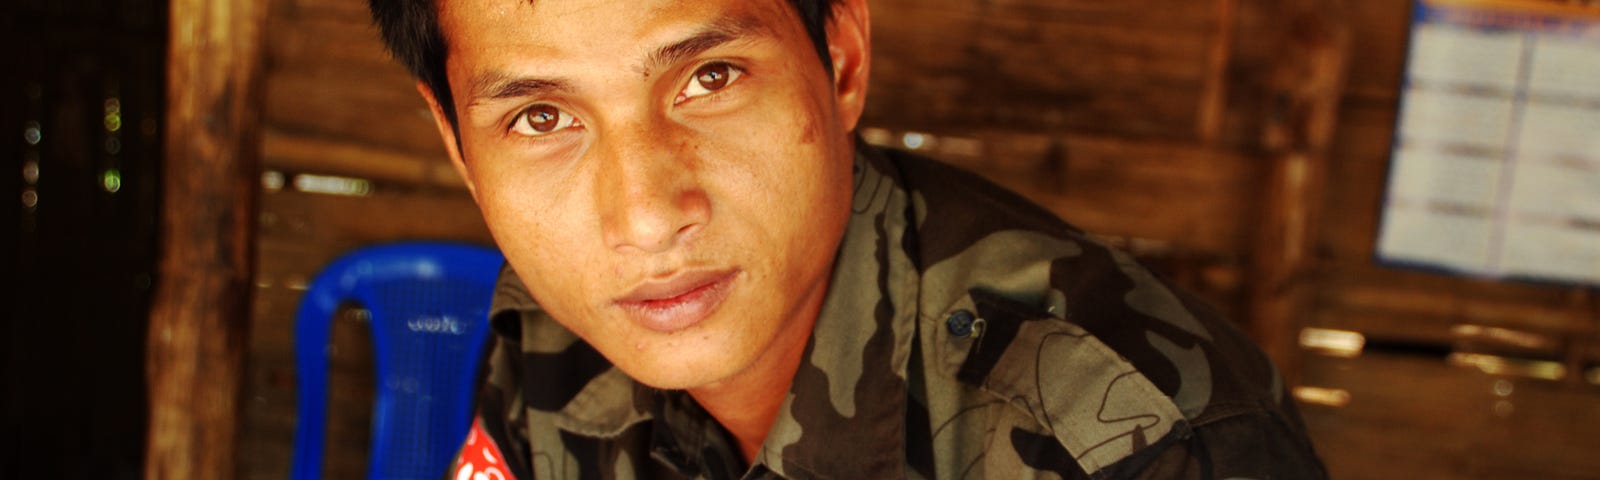 An Arakan Army soldier outside Laiza looks into the camera in Myanmar’s Kachin State in March 2014. Photo by David Brenner.